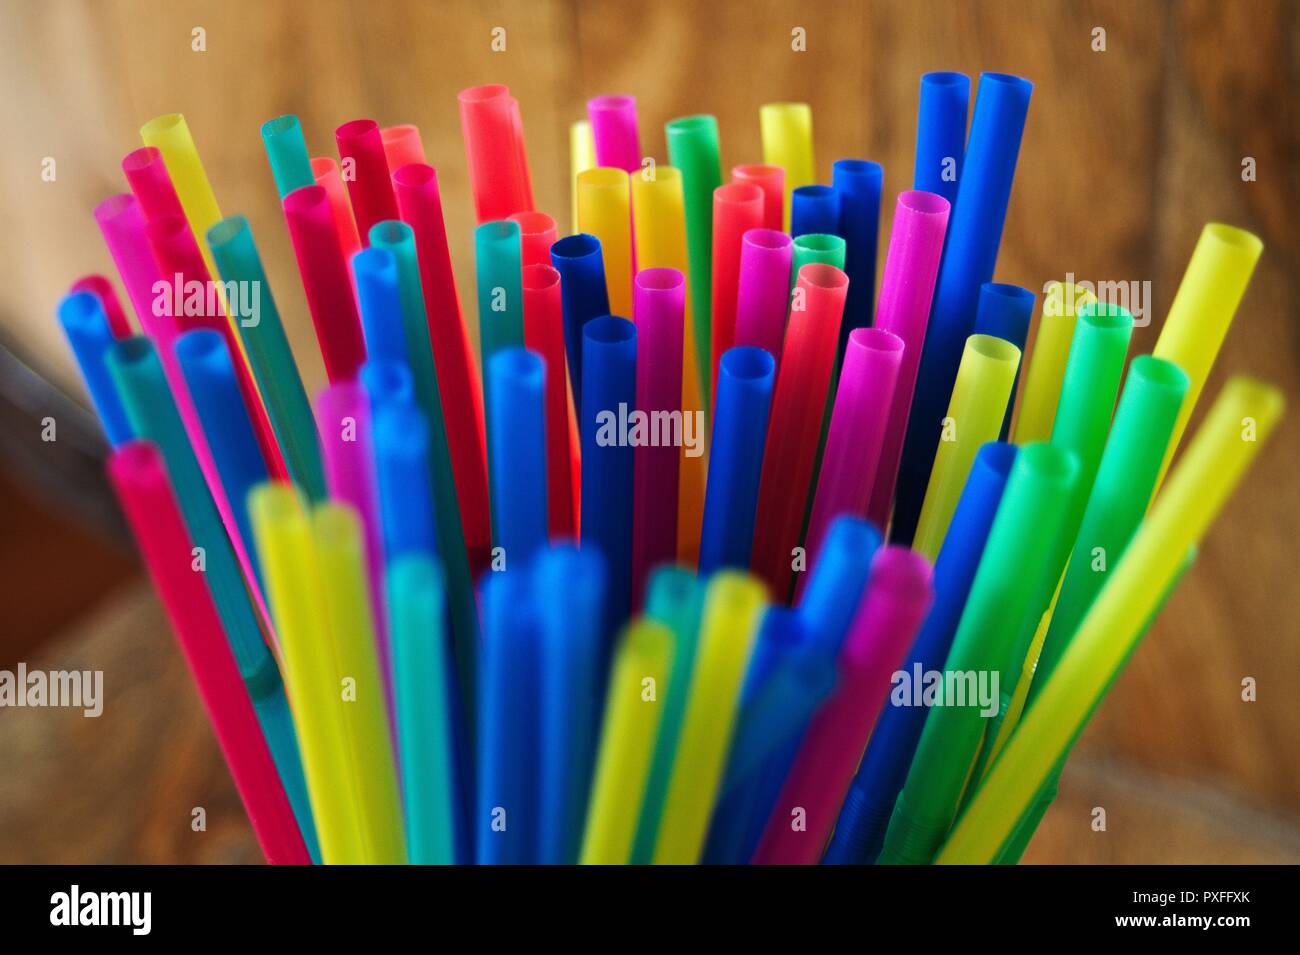 A collection of new plastic, disposable colored straws standing upright in a cup. Stock Photo